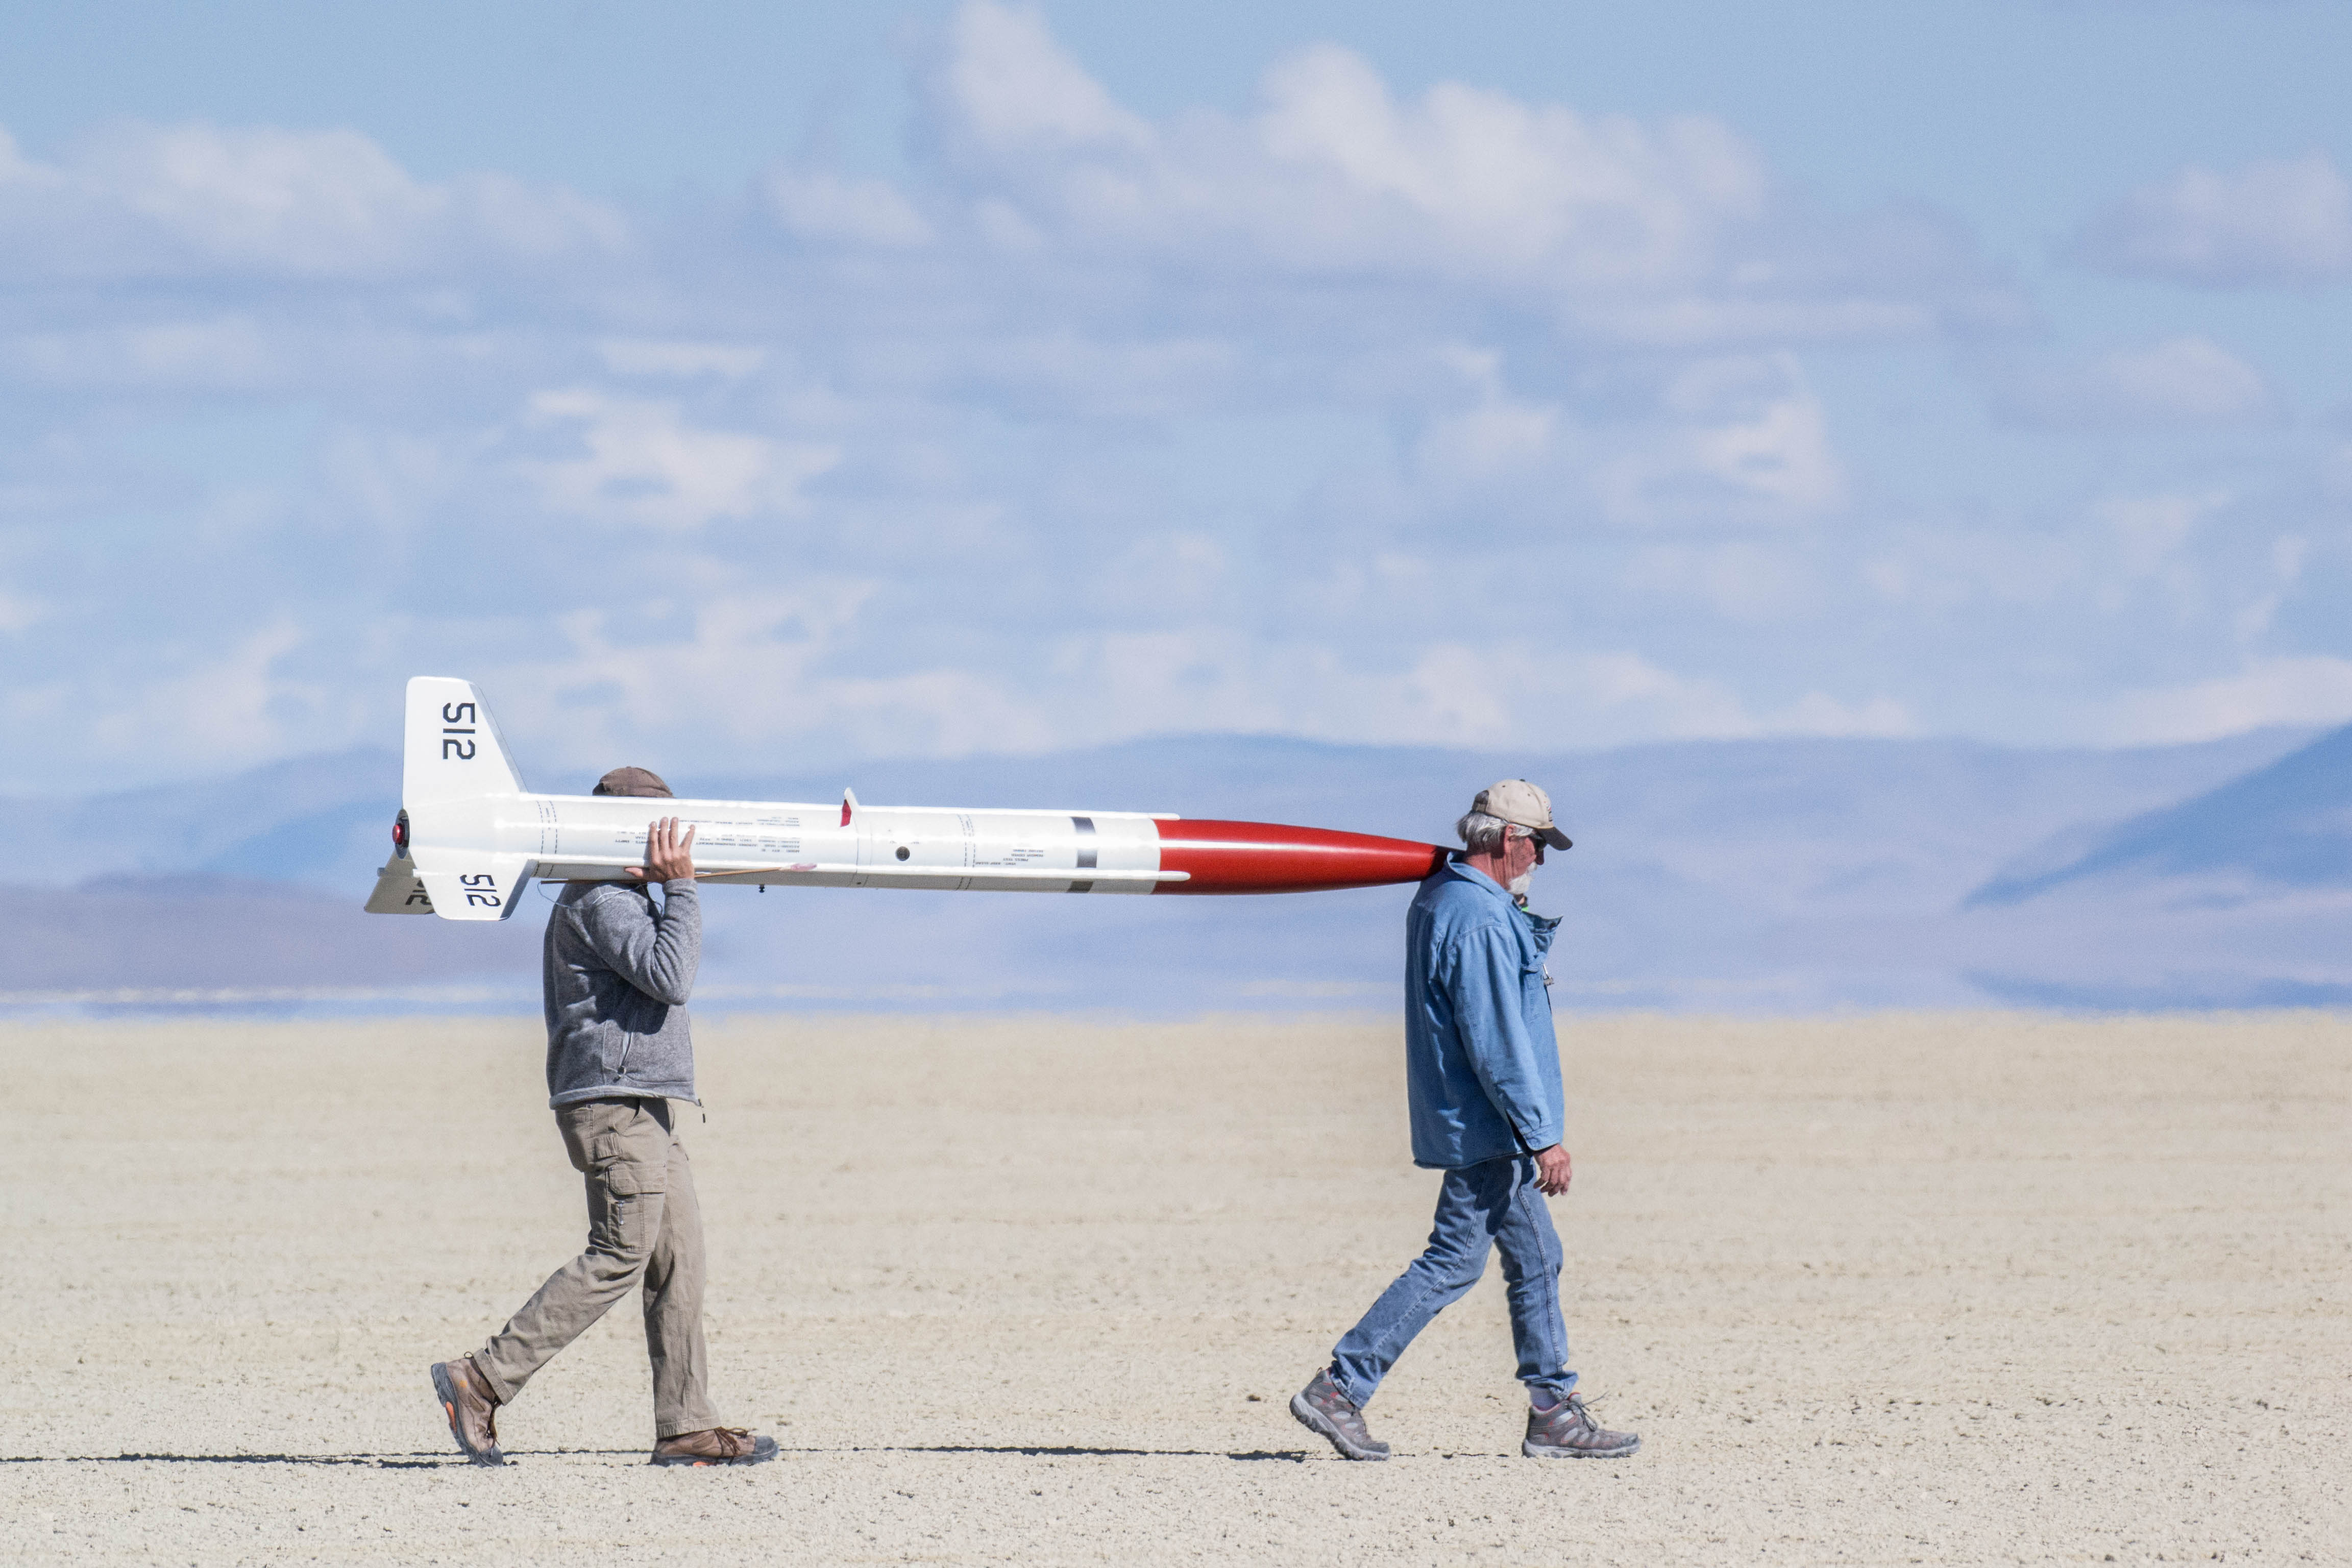 Inside the Most Exclusive High-Powered Rocketry Event in America